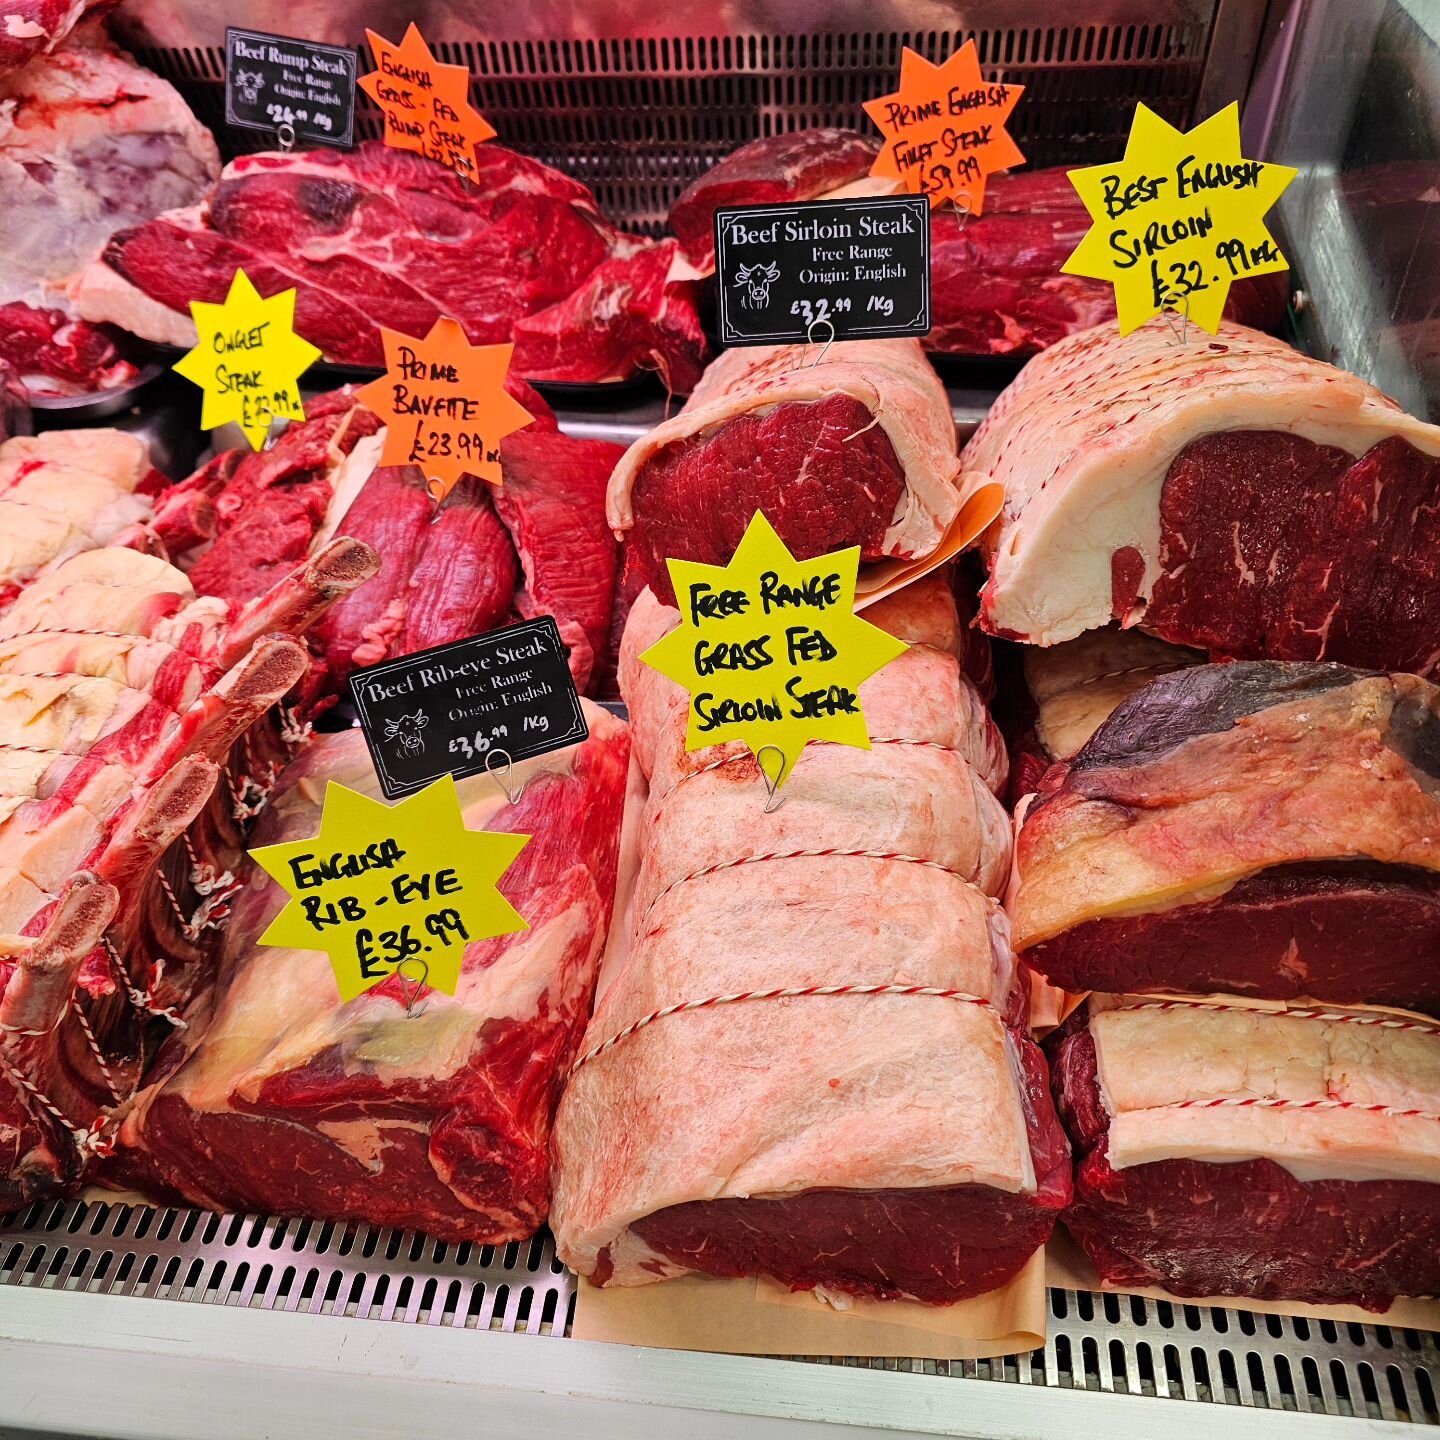 Fancy steak this Valentines? We have 8 varieties to choose from. Free range English beef all aged to perfection.

#sydenham #sydenhammums #dulwichmums #crystalpalacemums #nightin #butchers #freerange #fish #fishmongers #shopindependent #shopsmallbusi